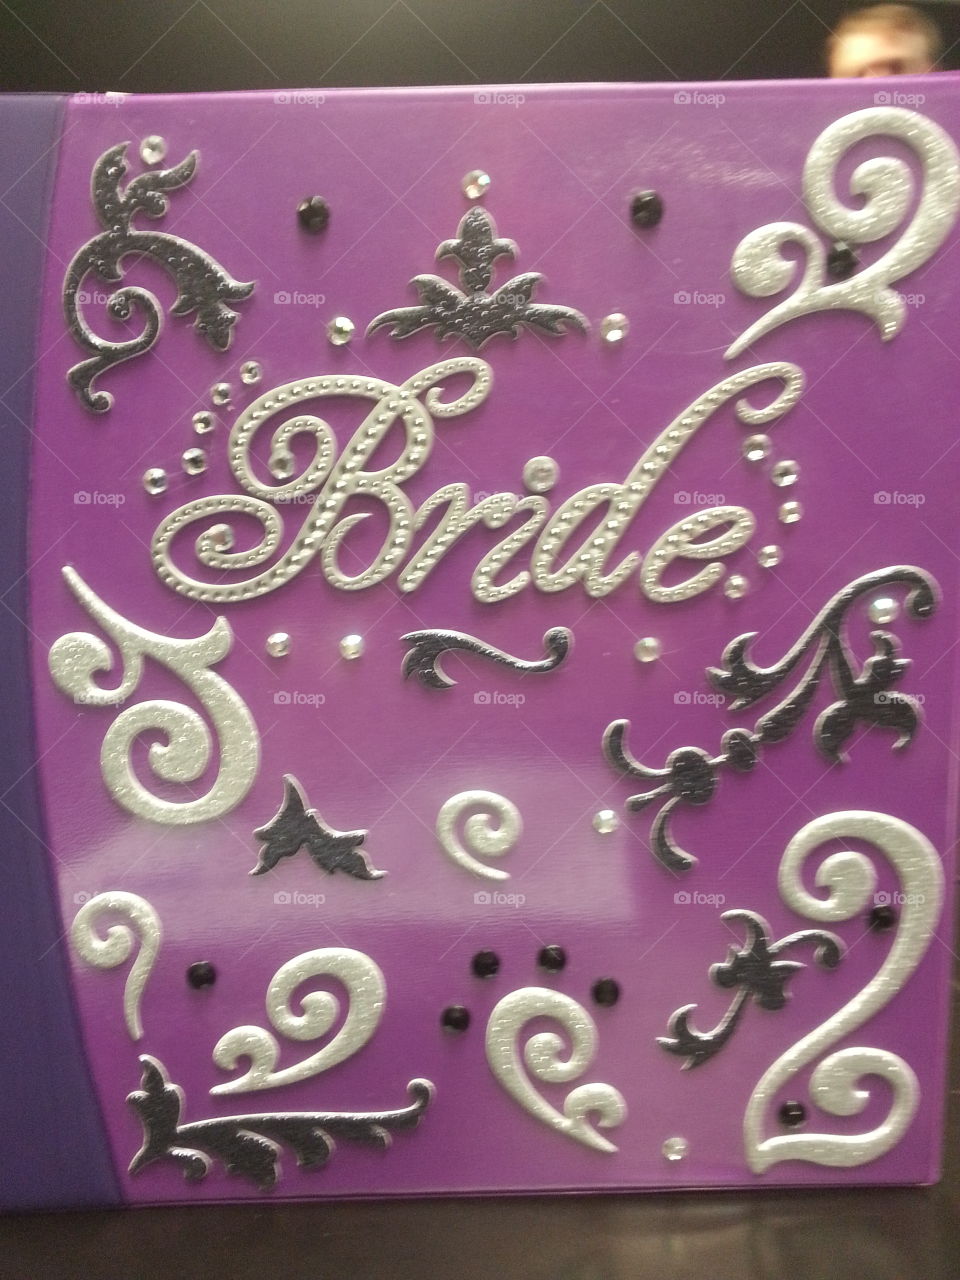 Bride Wedding Binder. The binder is the first step to a perfectly organized wedding.